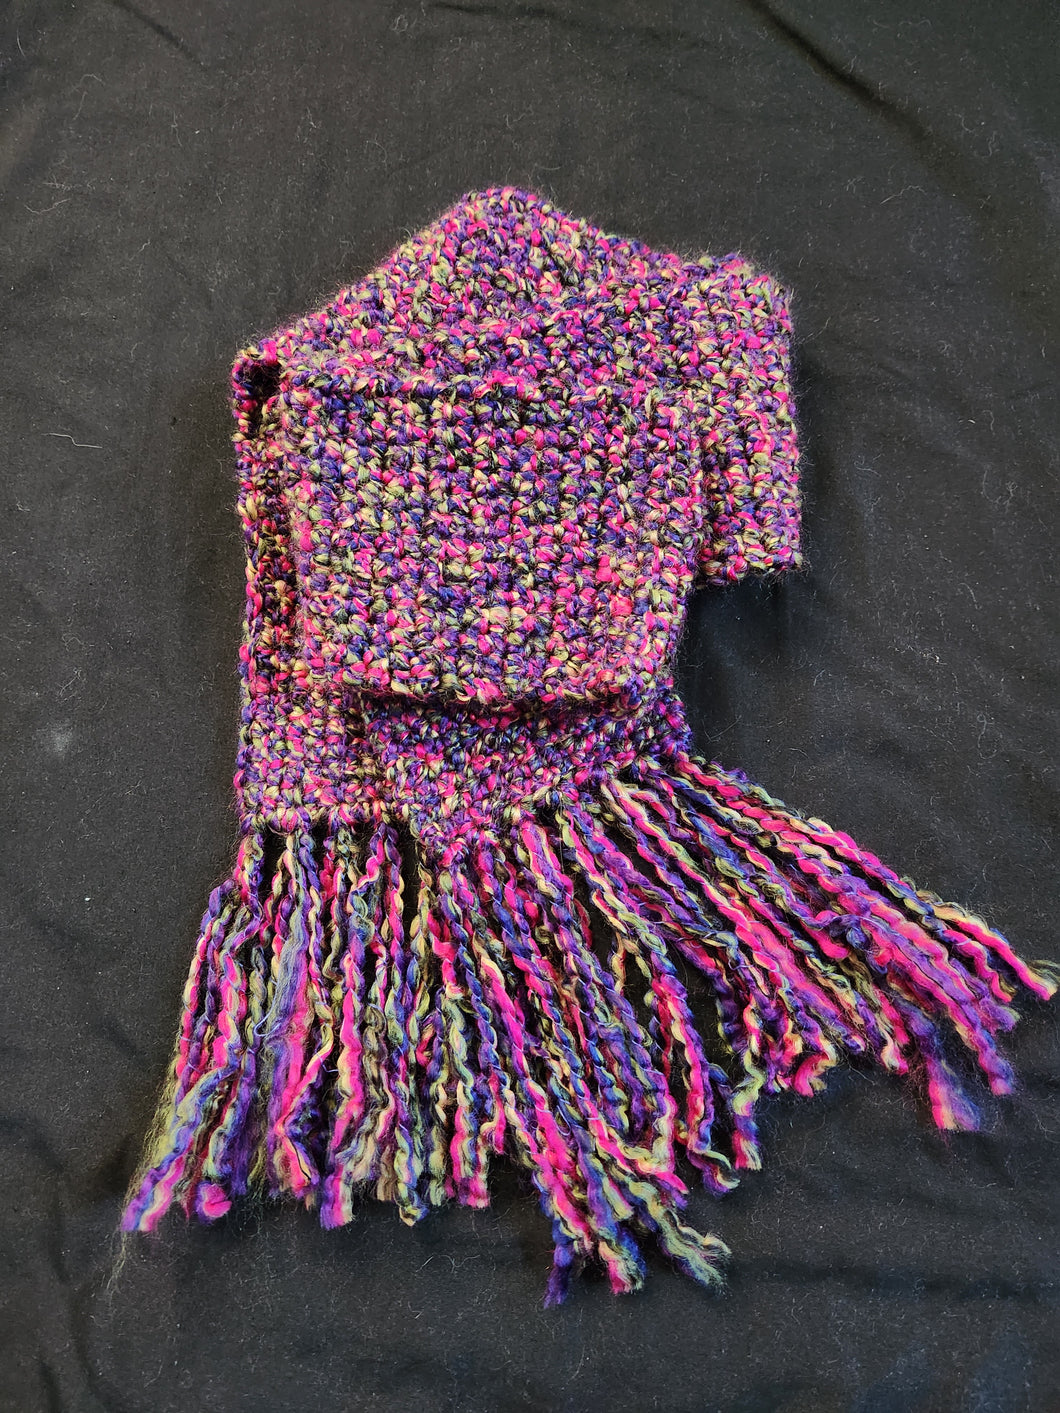 Crocheted Scarf - Purple, Pink, Green, & Yellow Blend